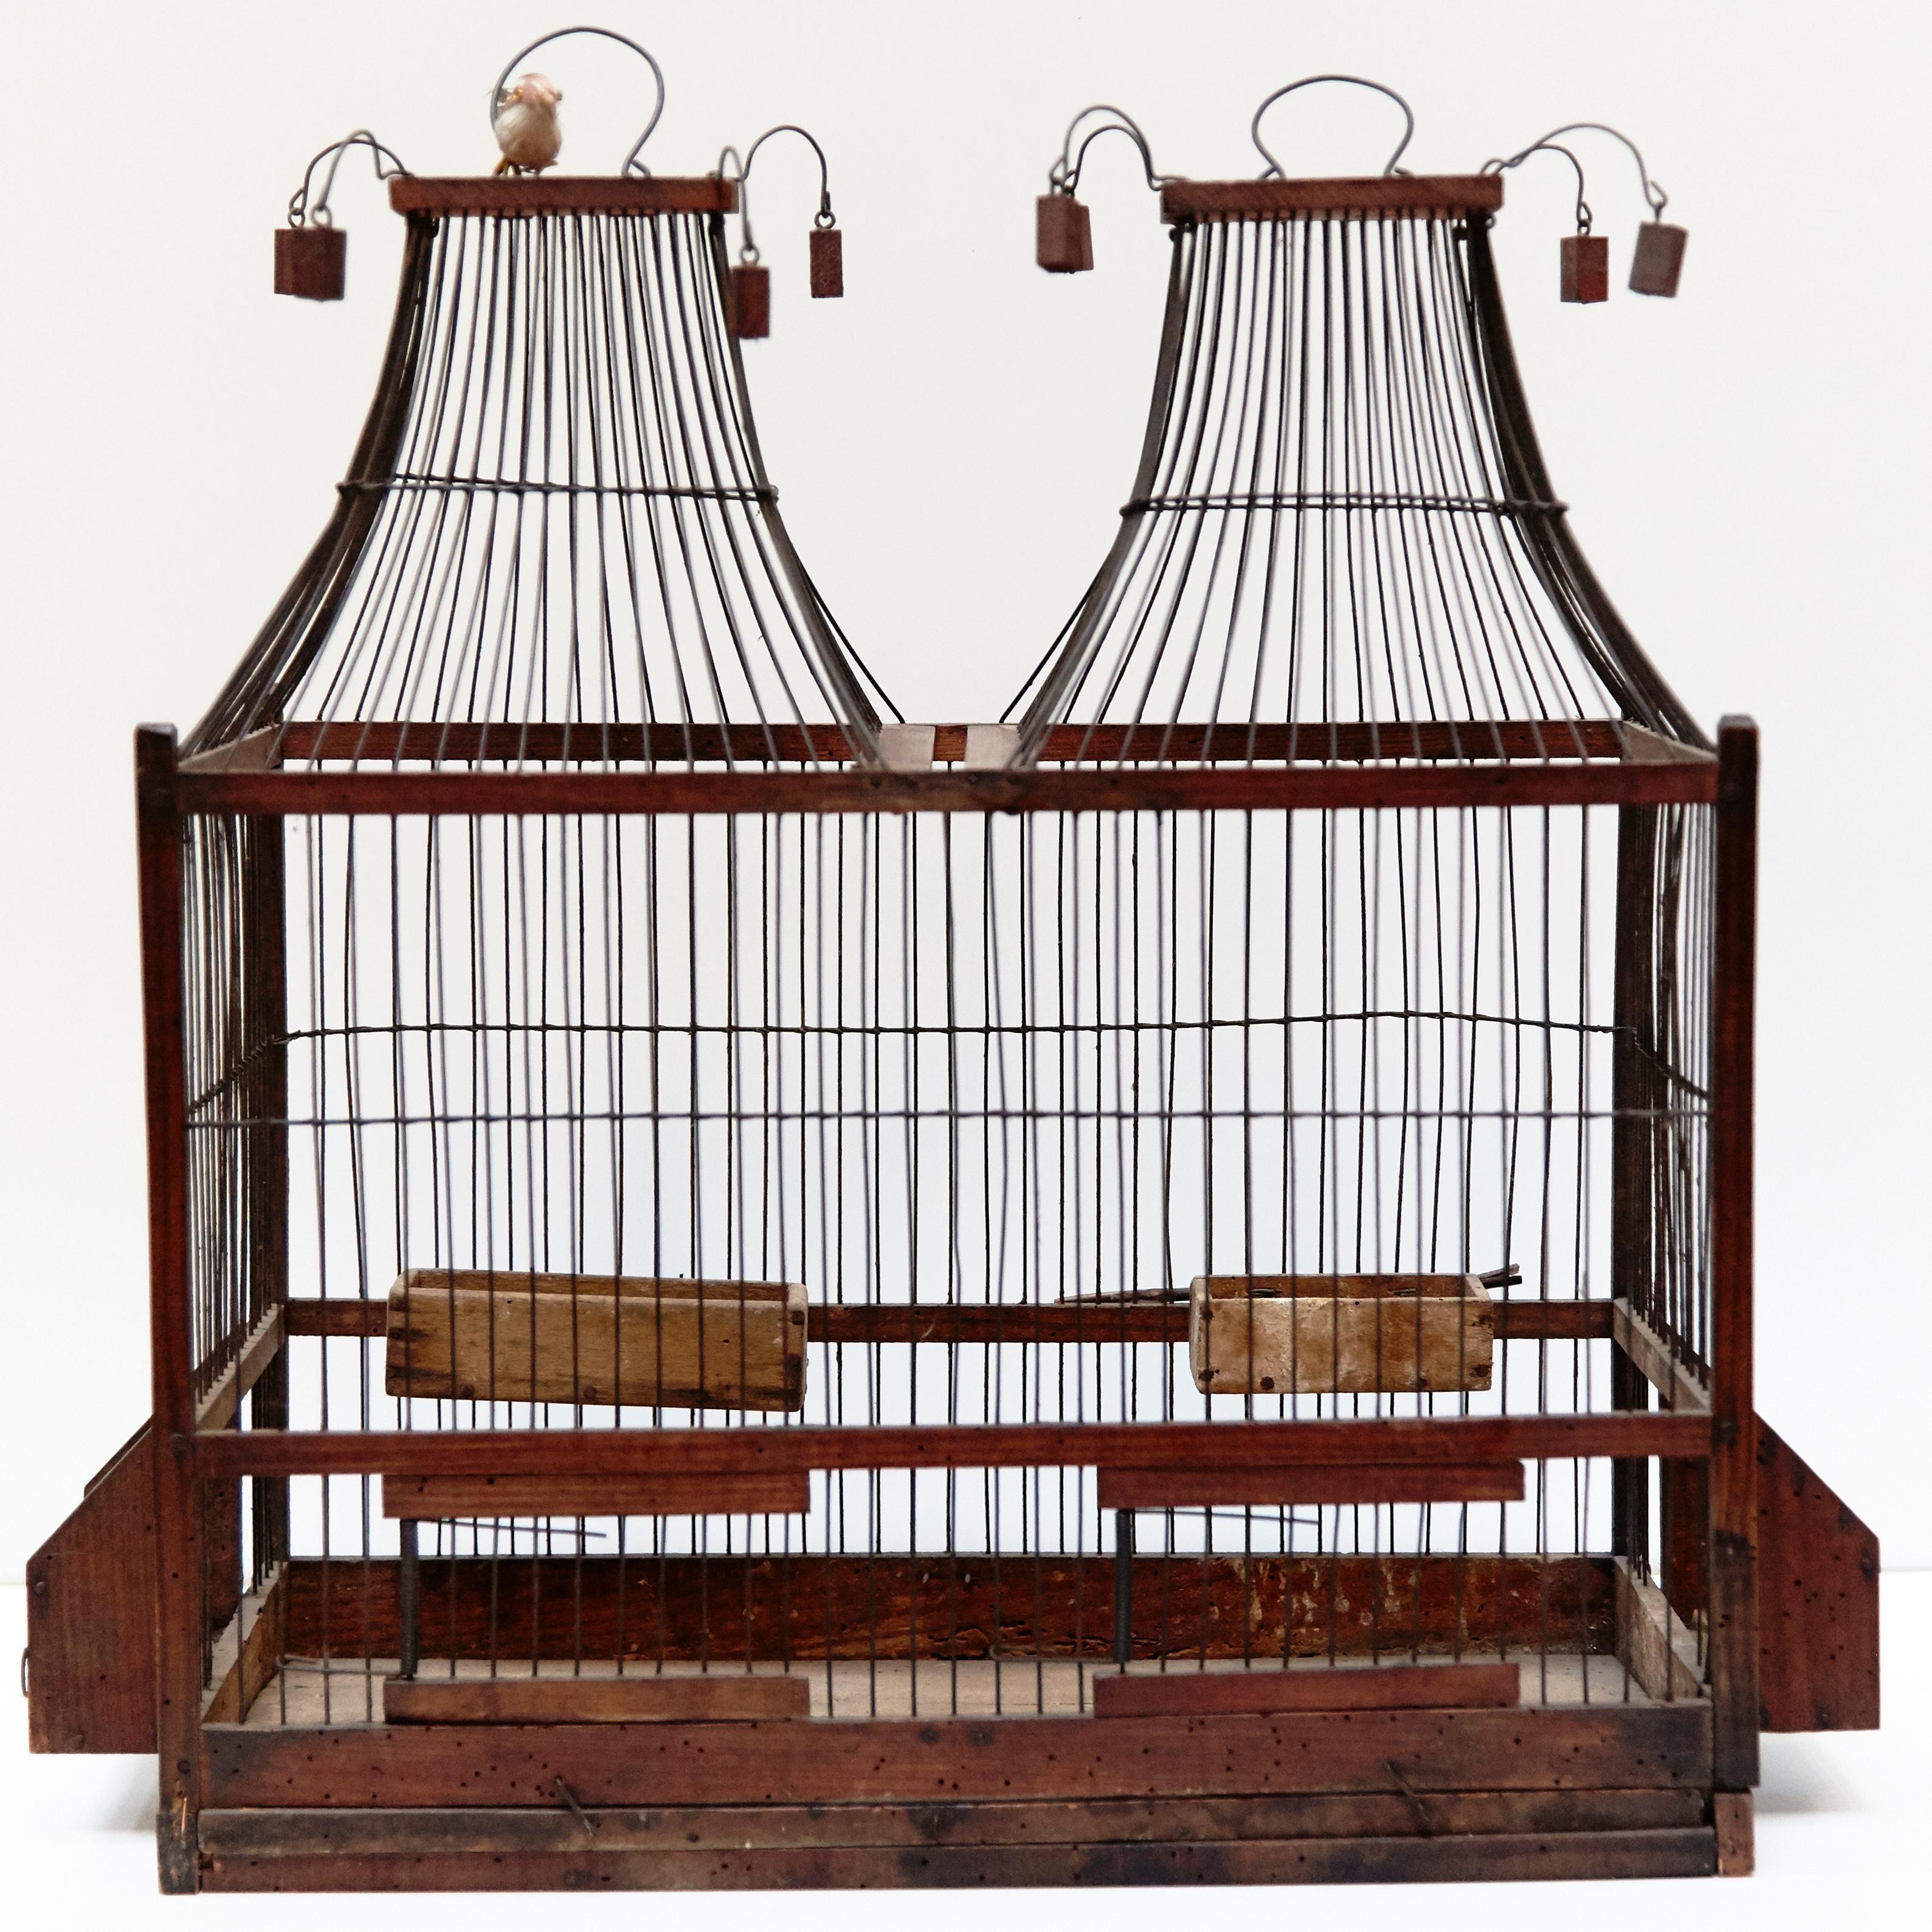 Wood popular traditional bird cage in wood and metal from France, circa 1930

In good original condition, preserving beautiful patina.